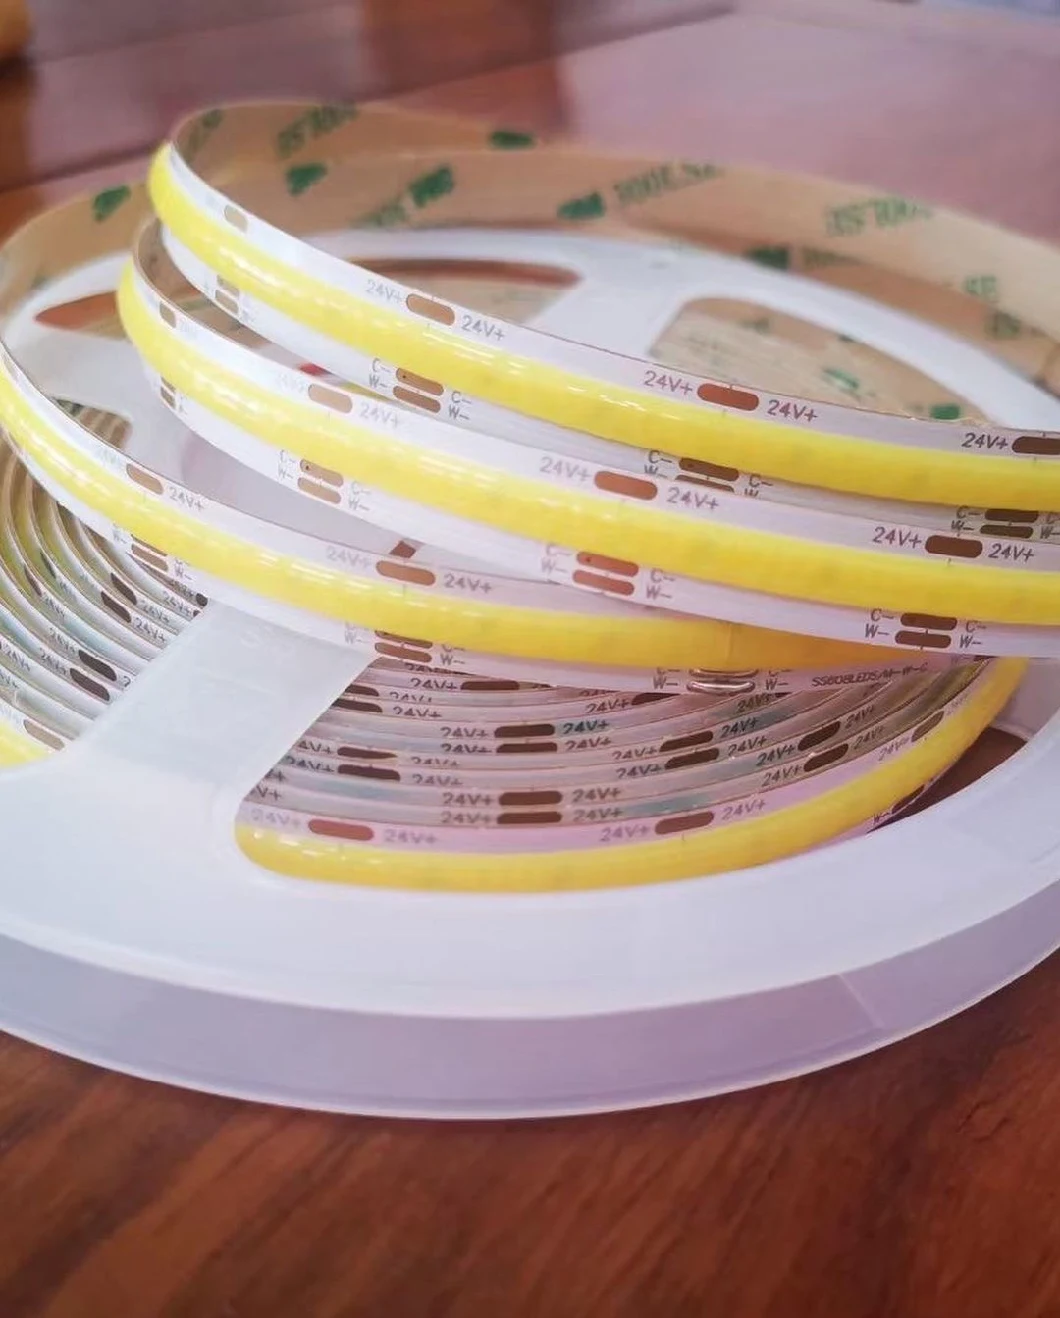 Professional Manufacturers Imported Transparent Clear LED Strip Light Potting Soft Epoxy Resin